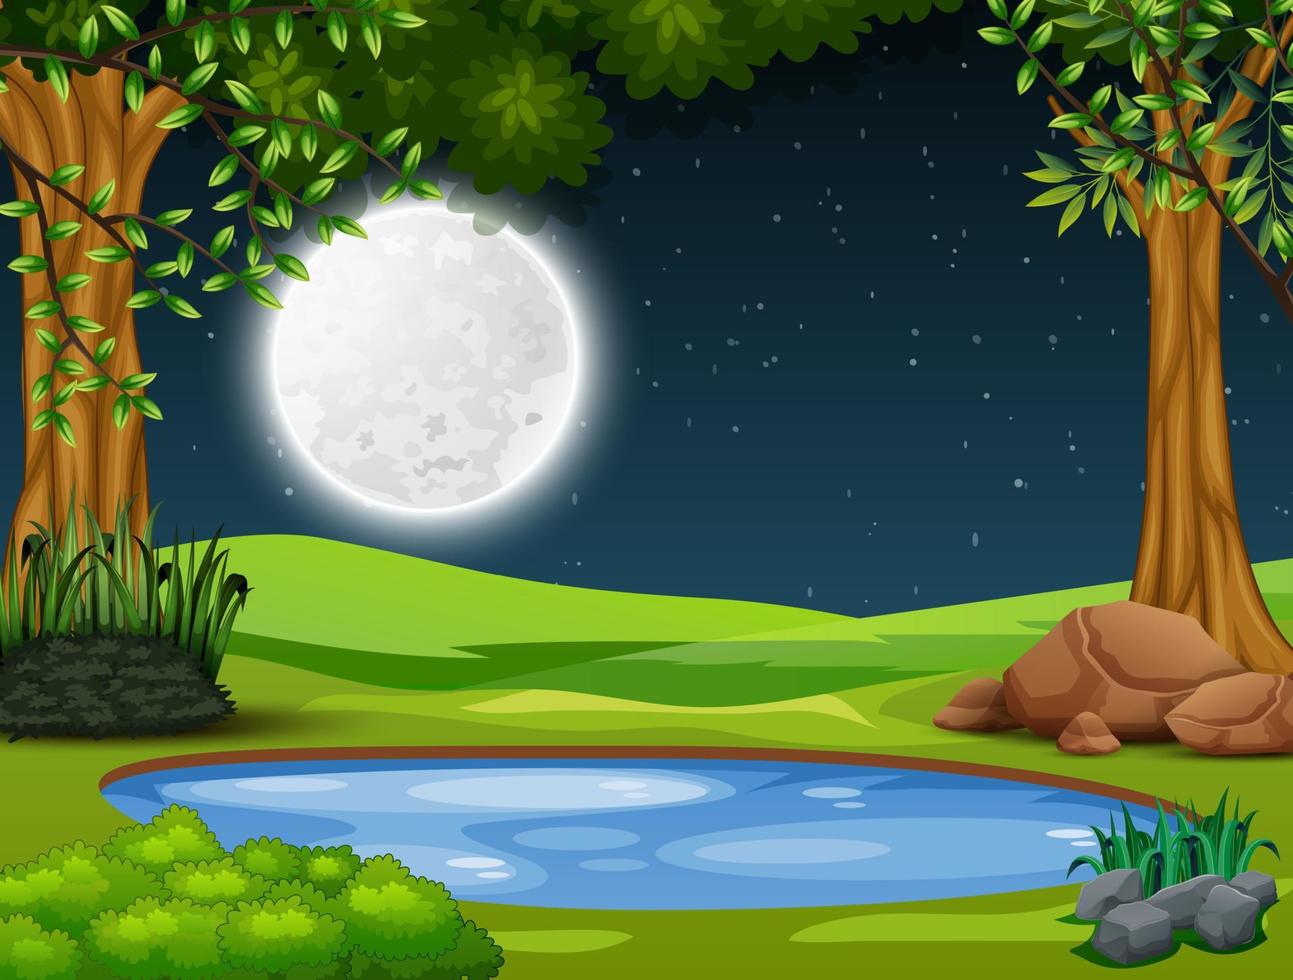 Small pond in the middle of the forest at night landscape vector